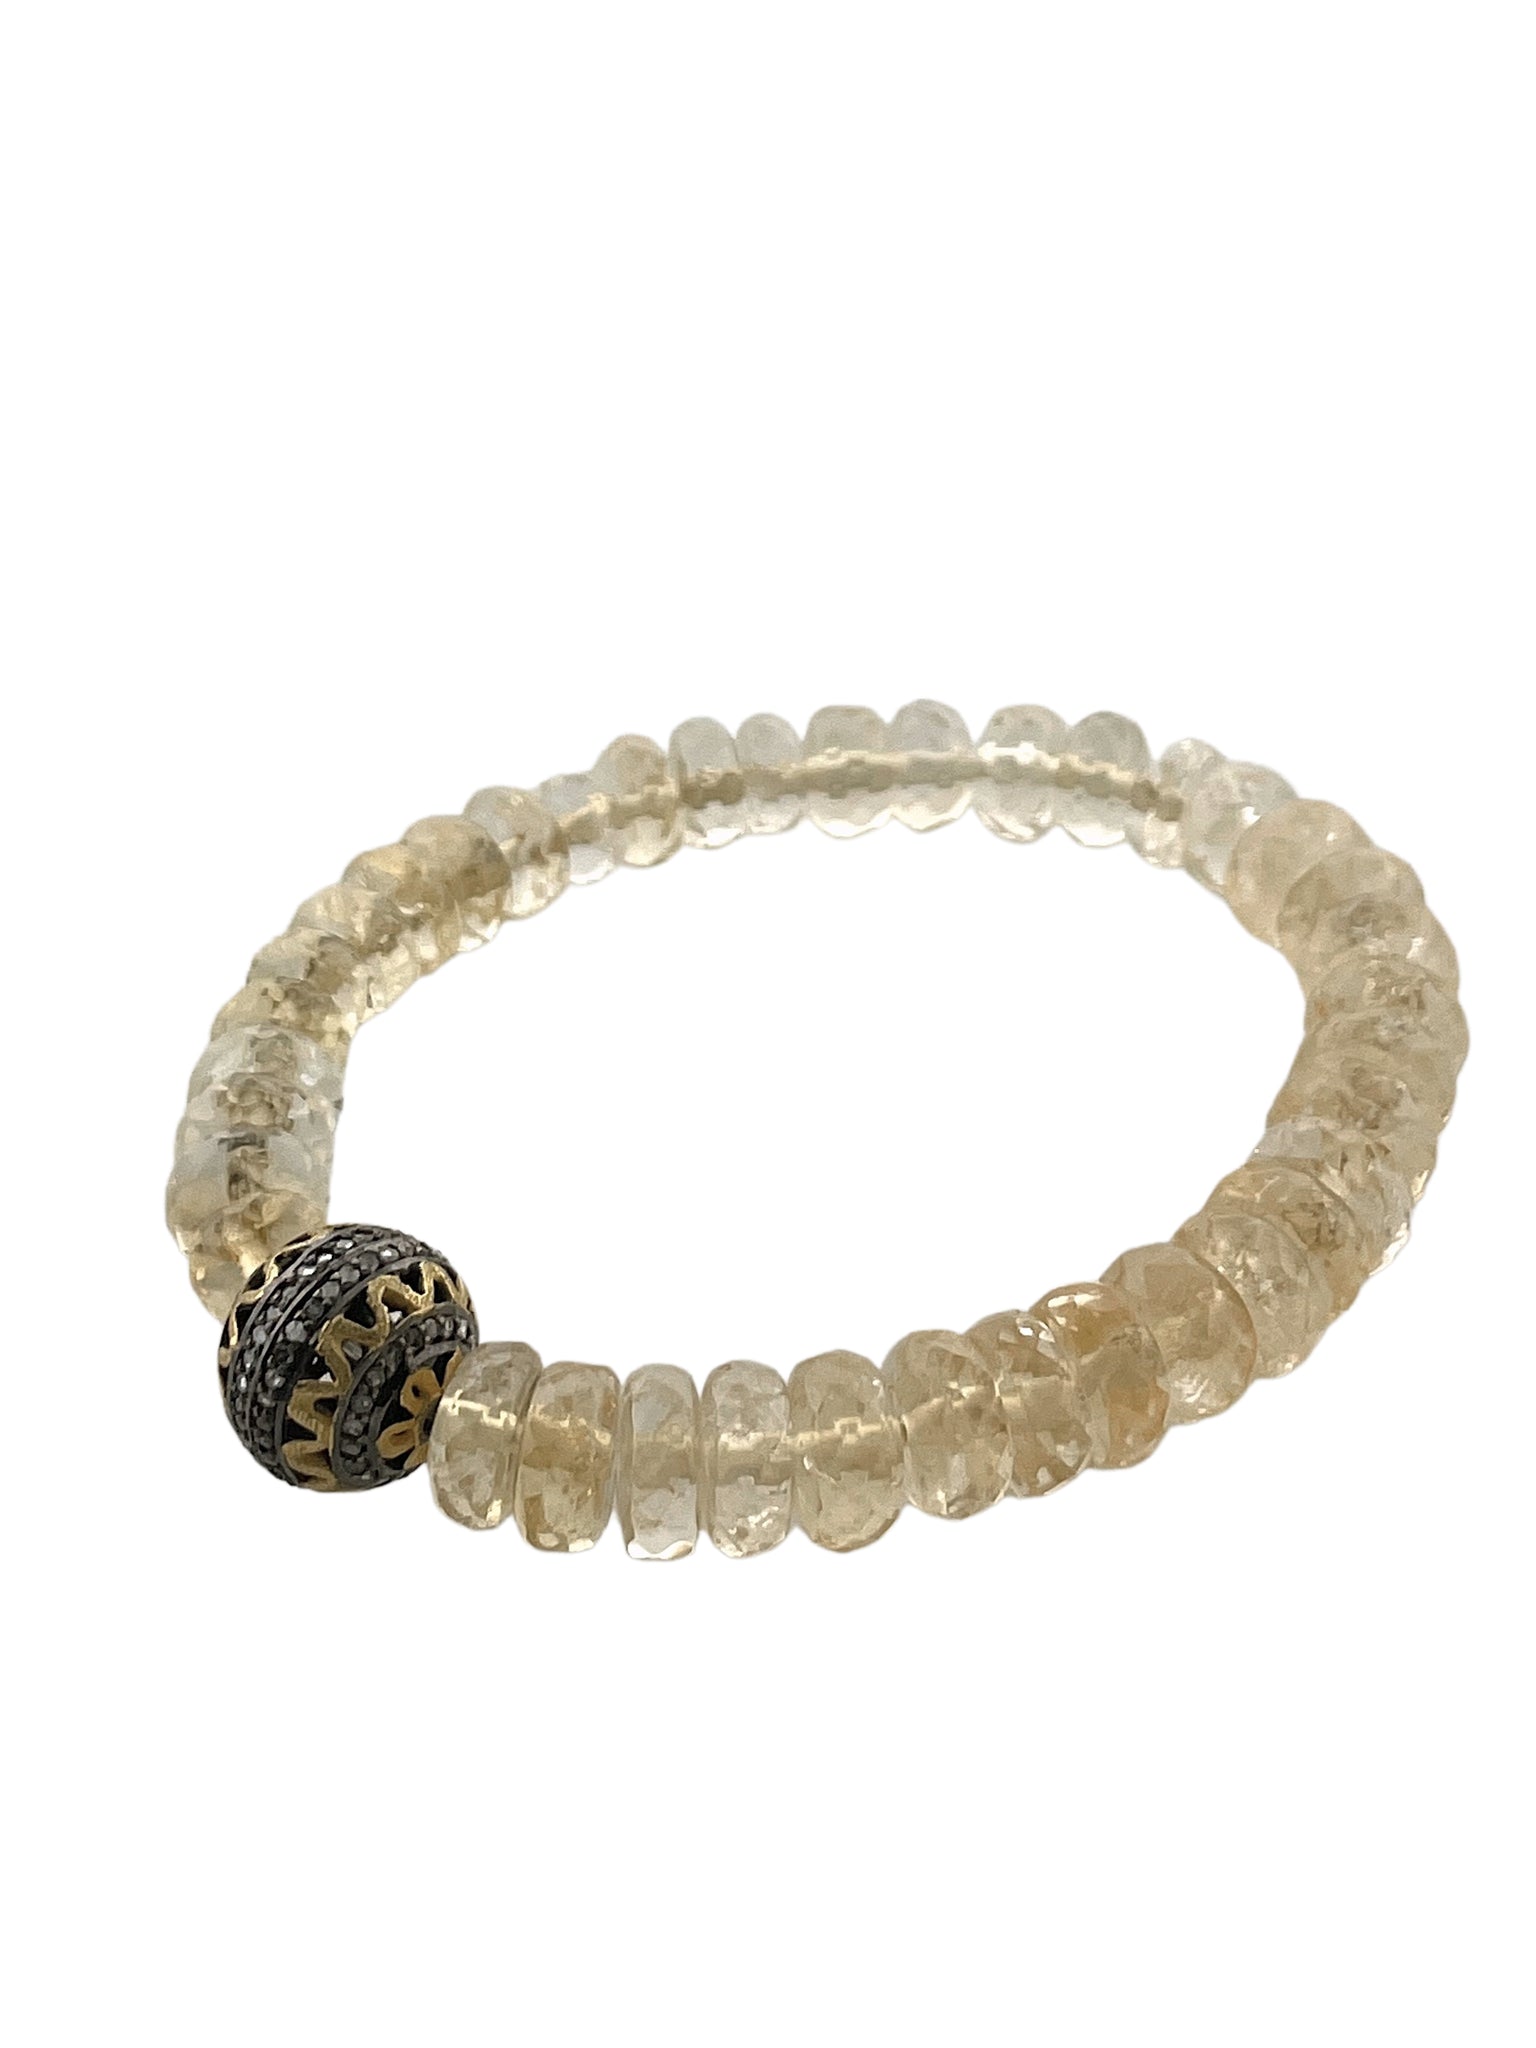 Faceted Citrine with Pave Diamond Mixed Metal Bead